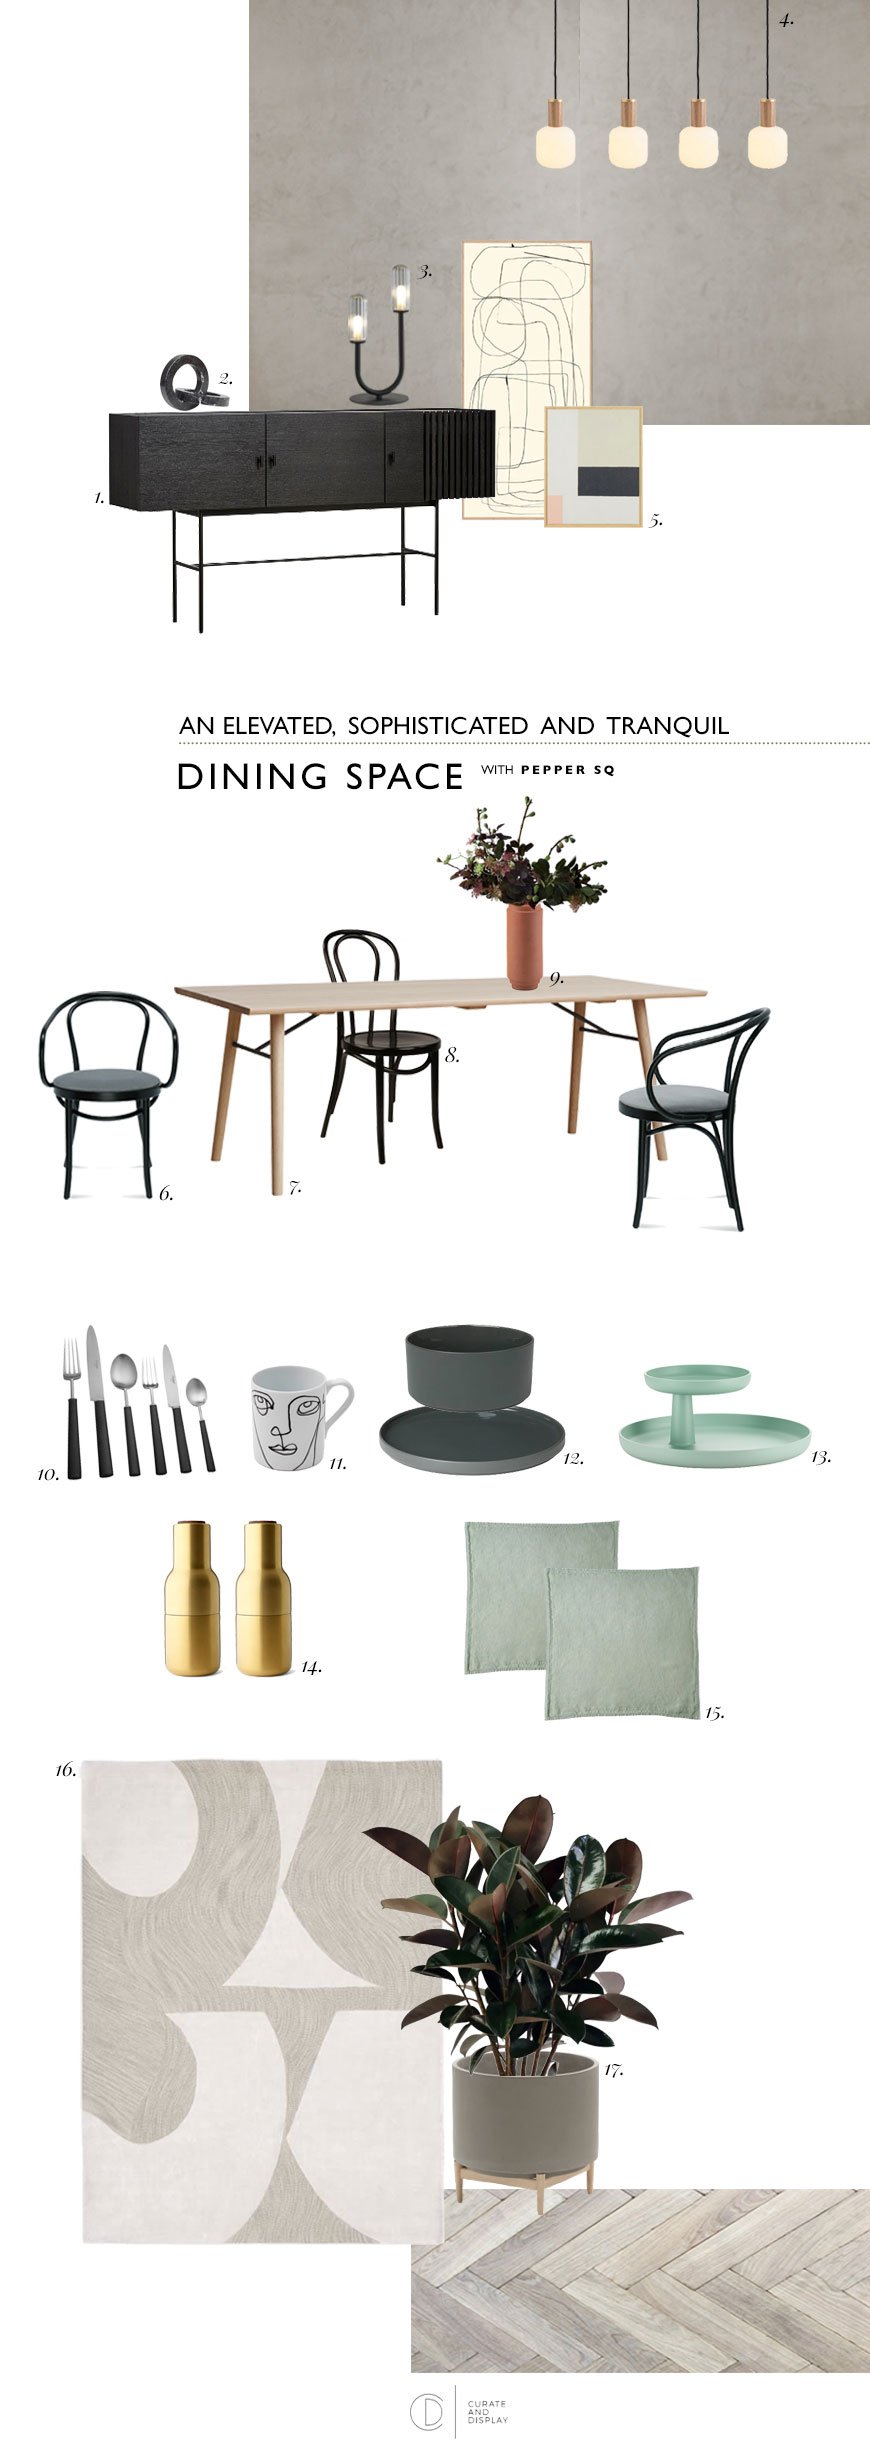 A visual moodboard of an elevated, sophisticated and tranquil dining room with Nordic influences and touches of pale green. 